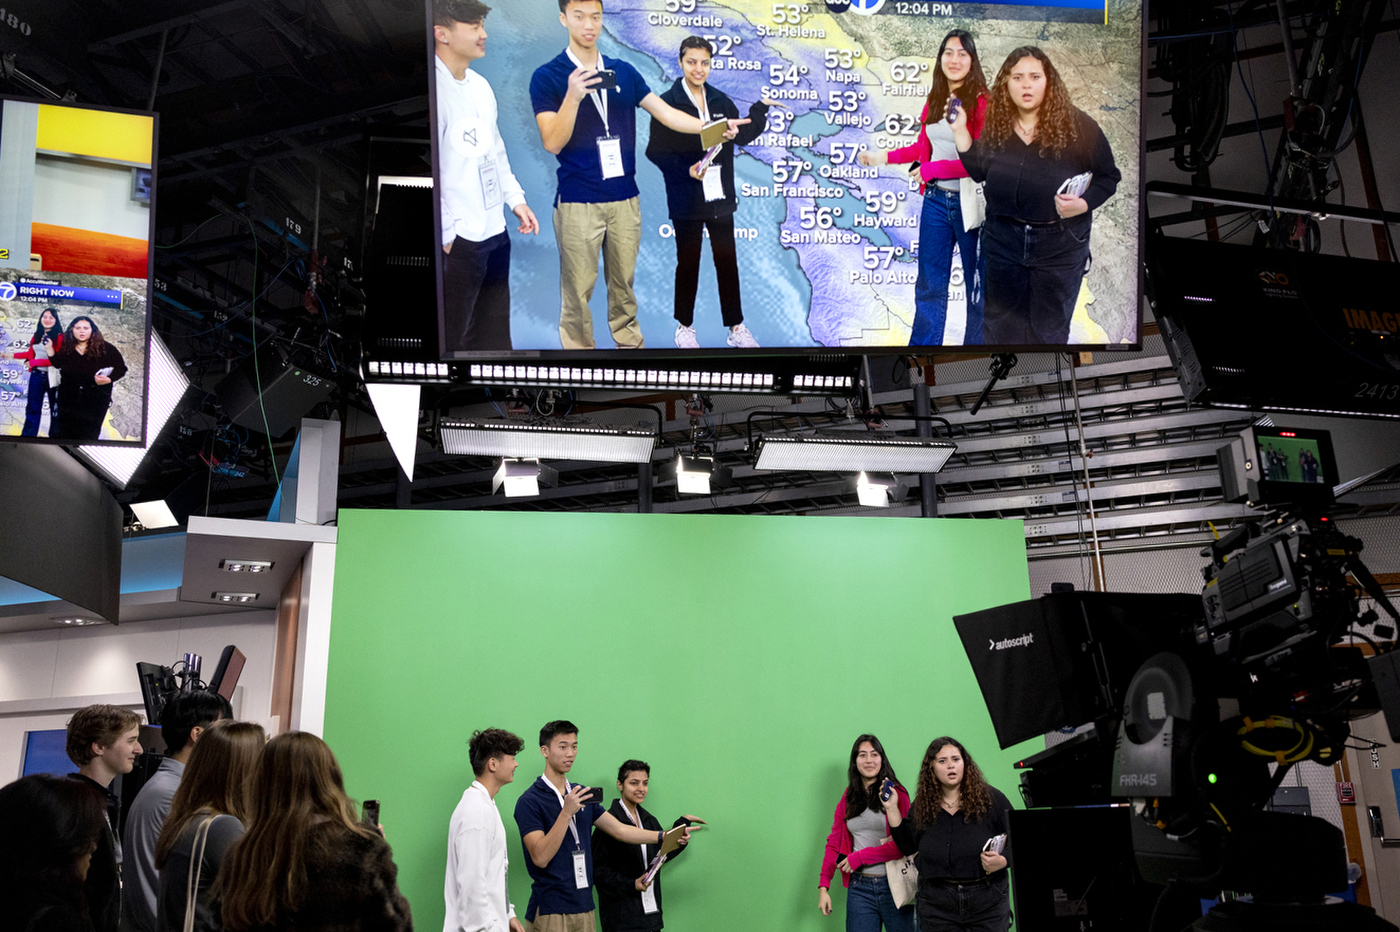 Multiple people stand in front of a green screen inside a news station studio.